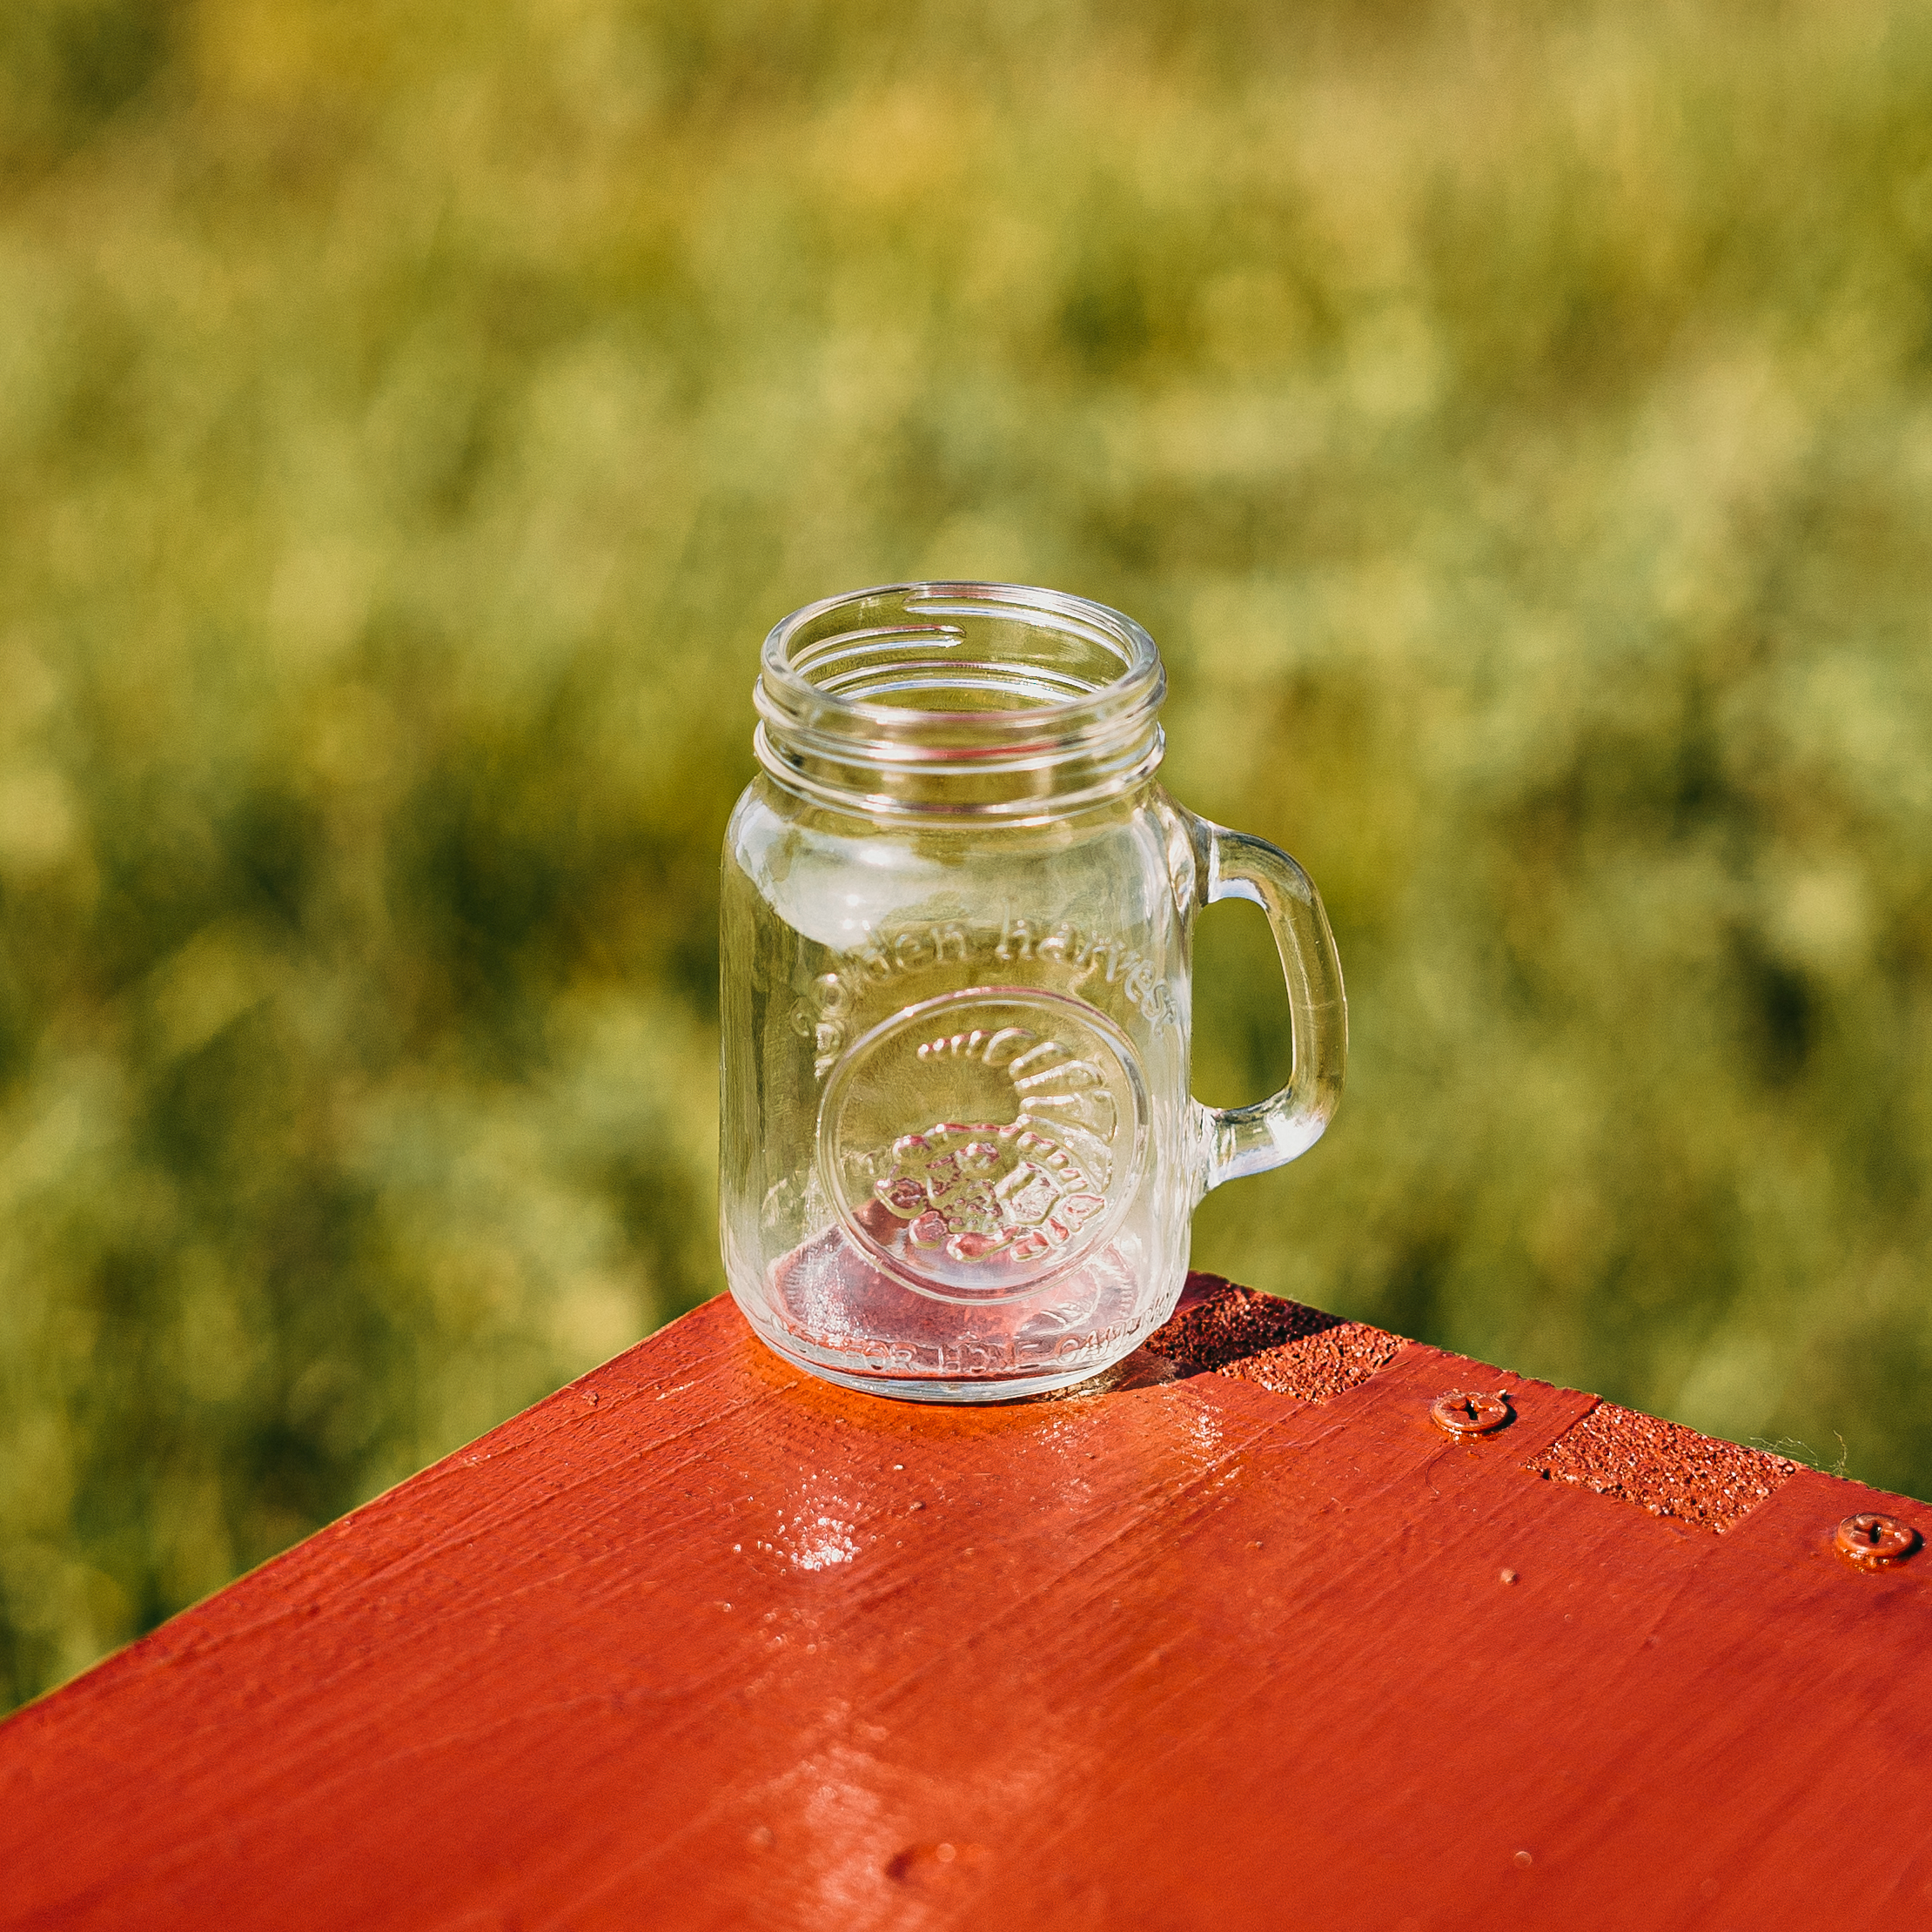 Libbey County Fair Glass Drinking Jars Set of 12